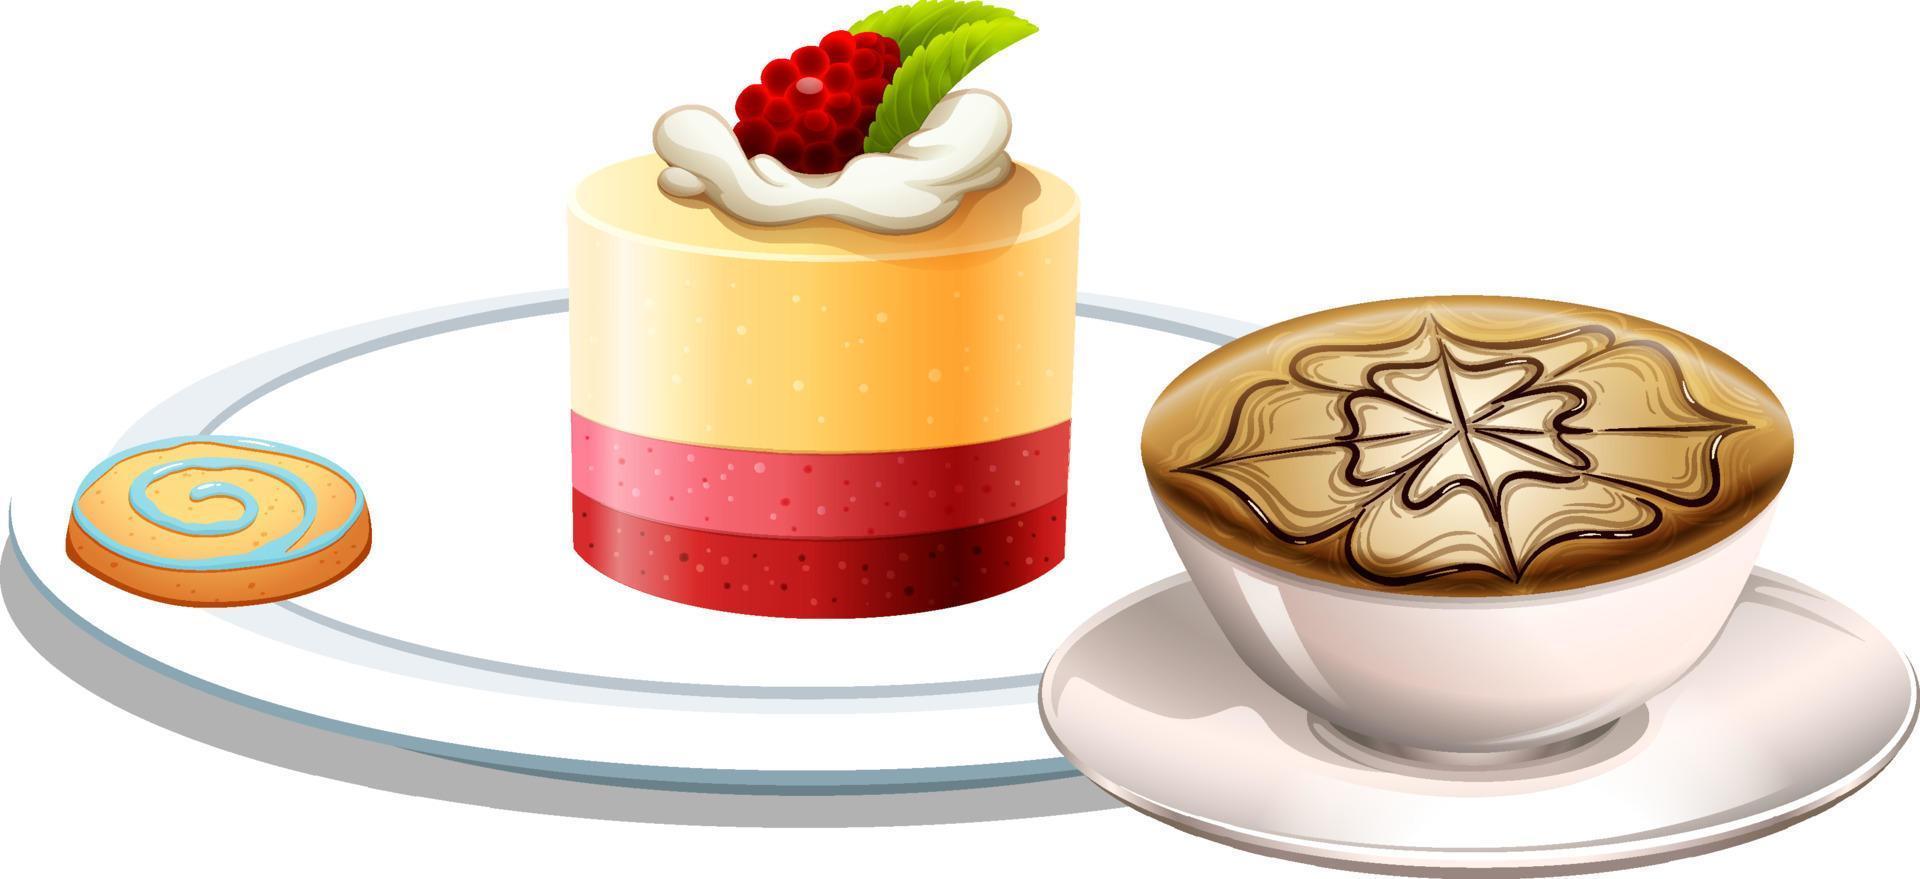 Panna cotta and coffee cup on white background vector